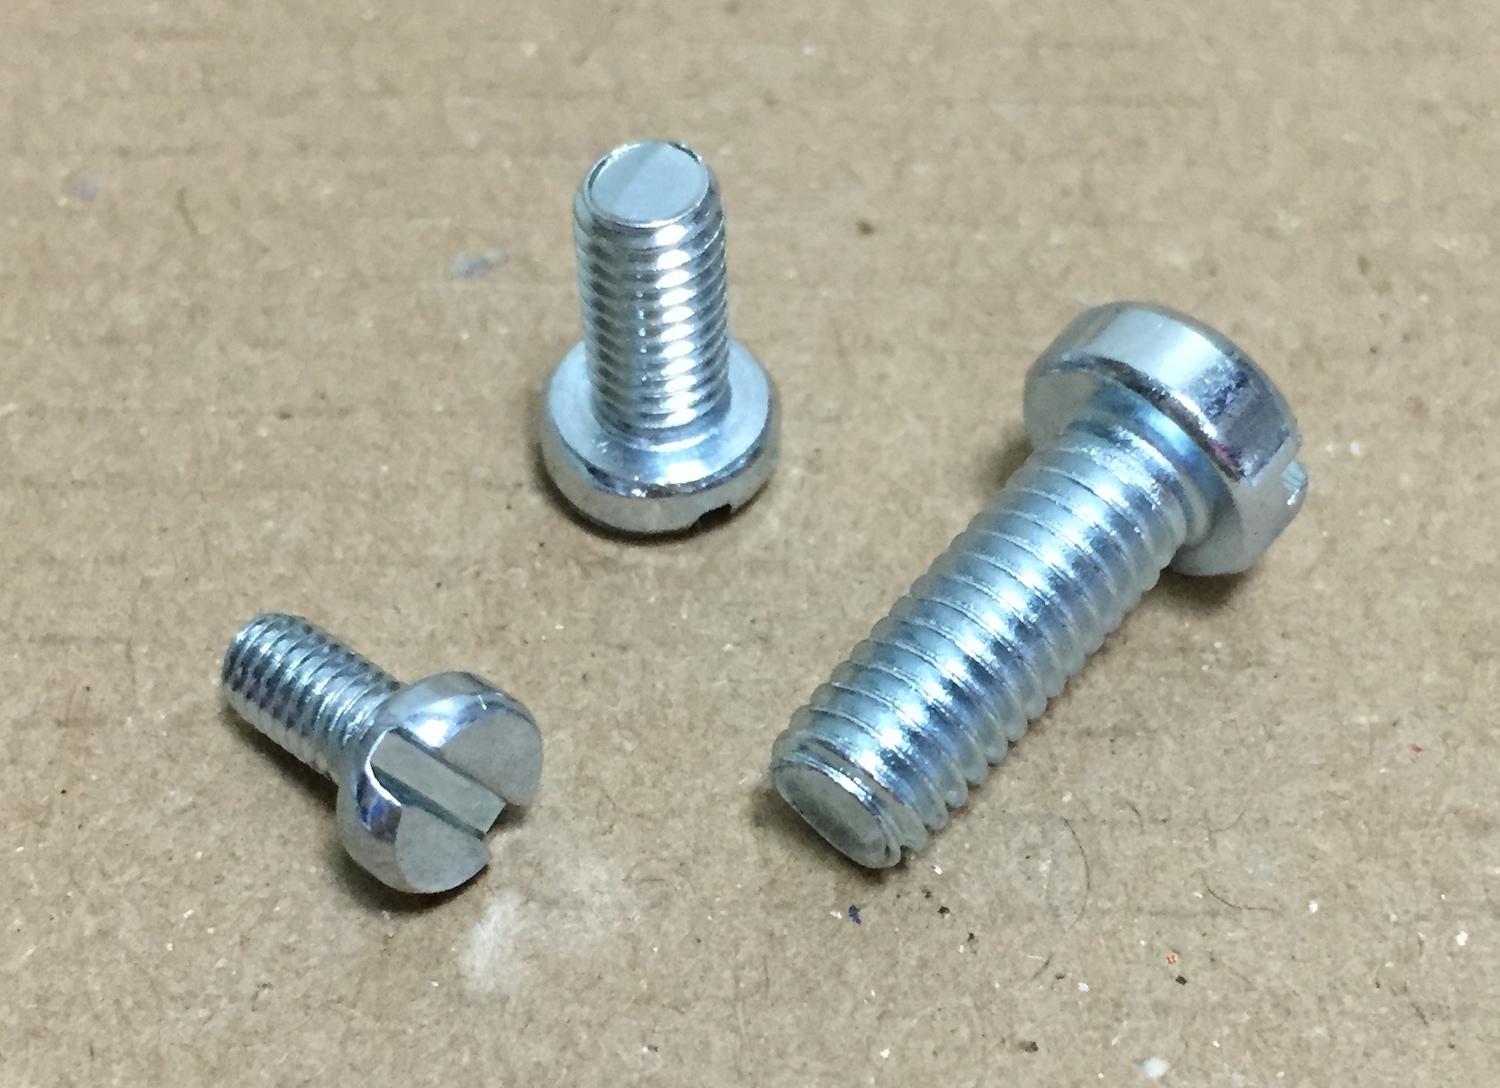 25 Pieces M5-.80 x 35 Stainless Steel Slotted Cheese Head Machine Screw DIN84 A2 M5x35 